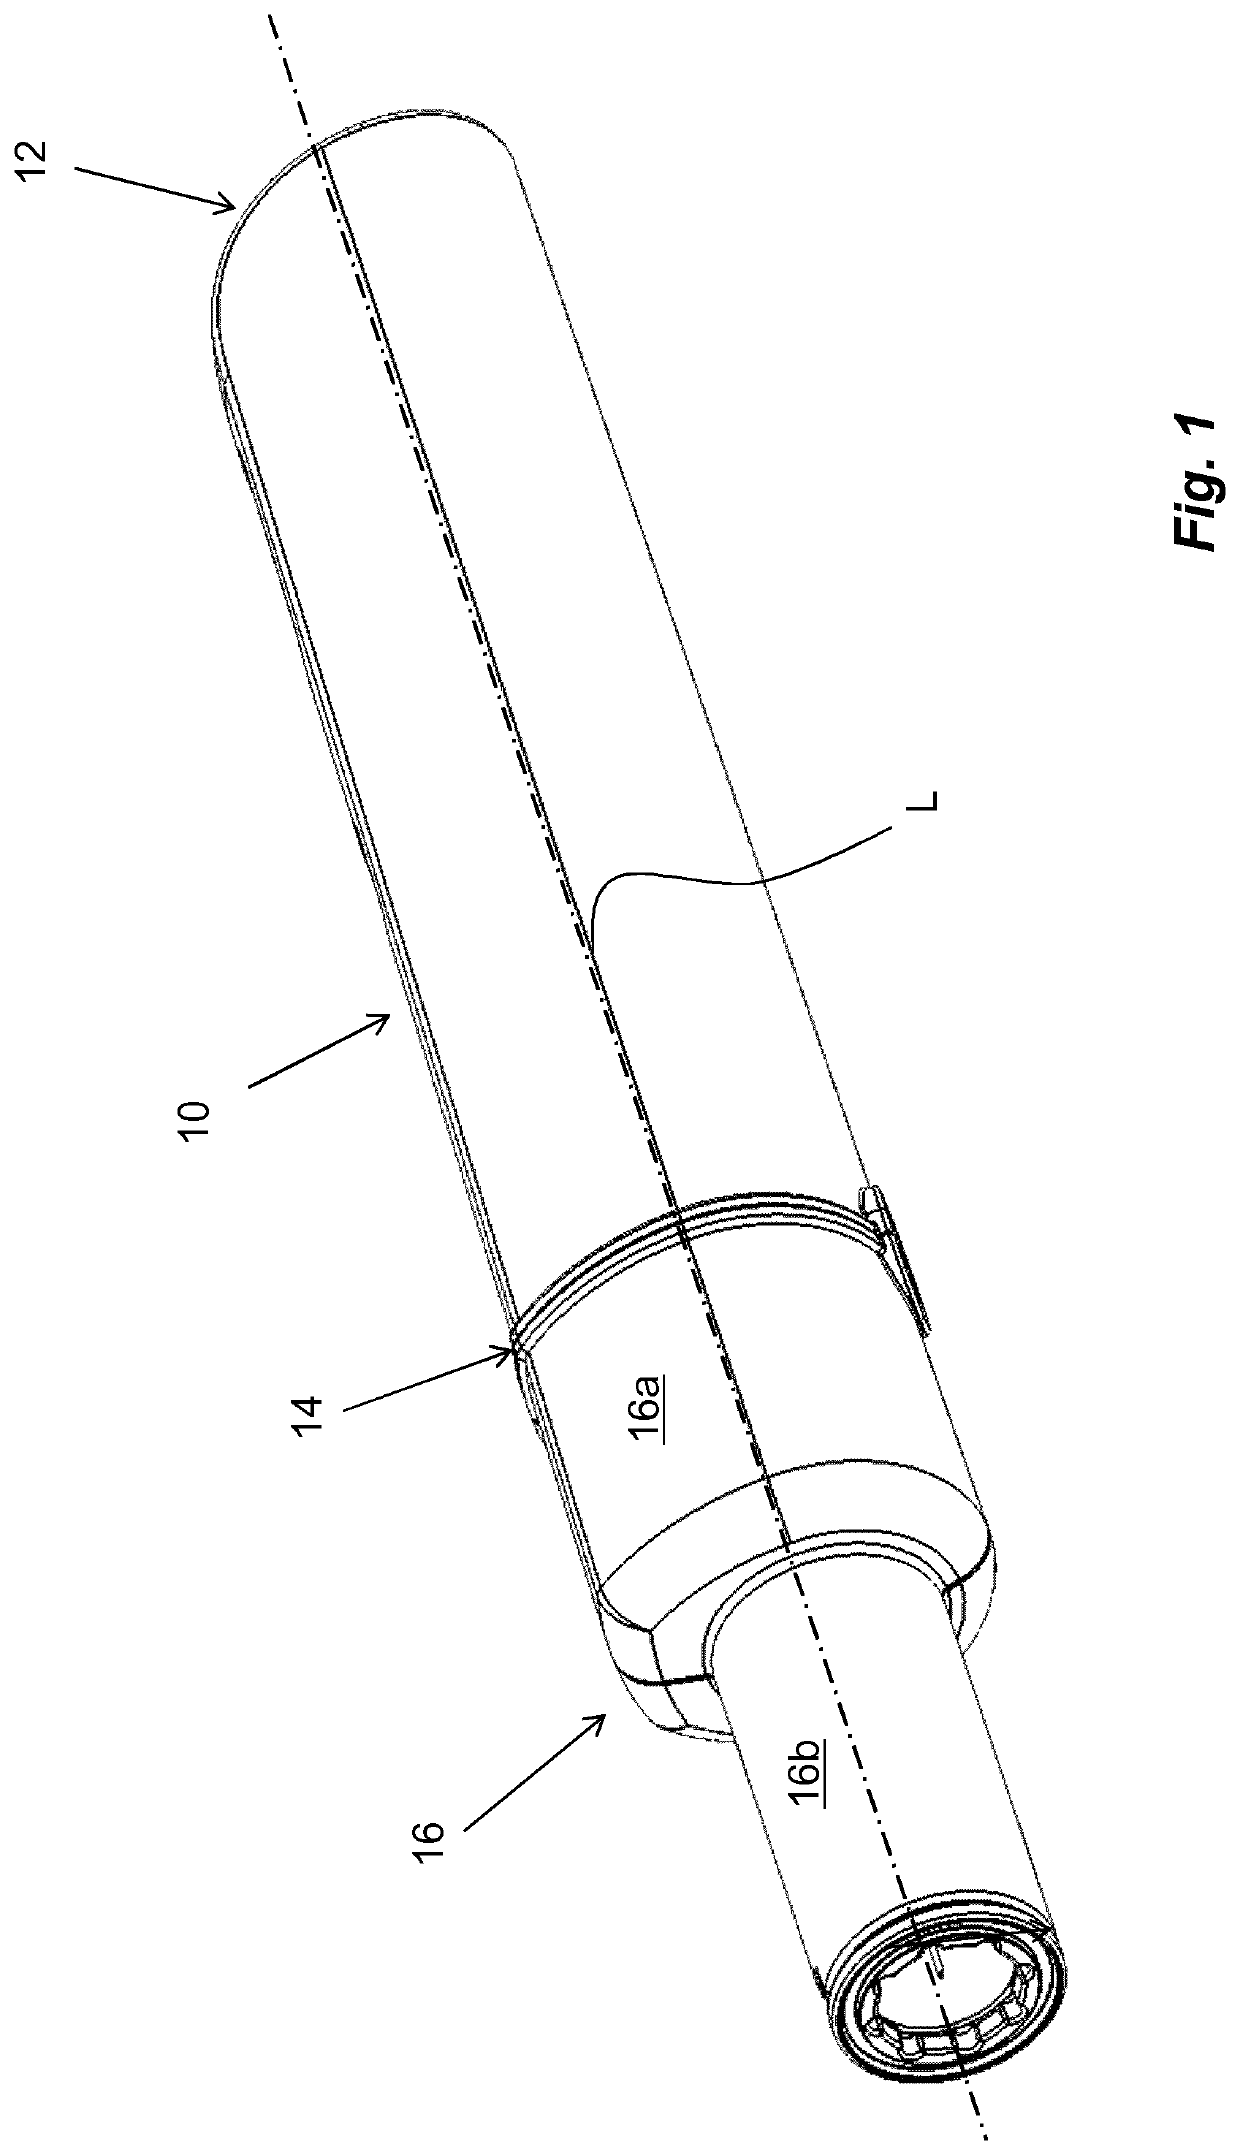 Autoinjector with delayed signal of complete medication delivery